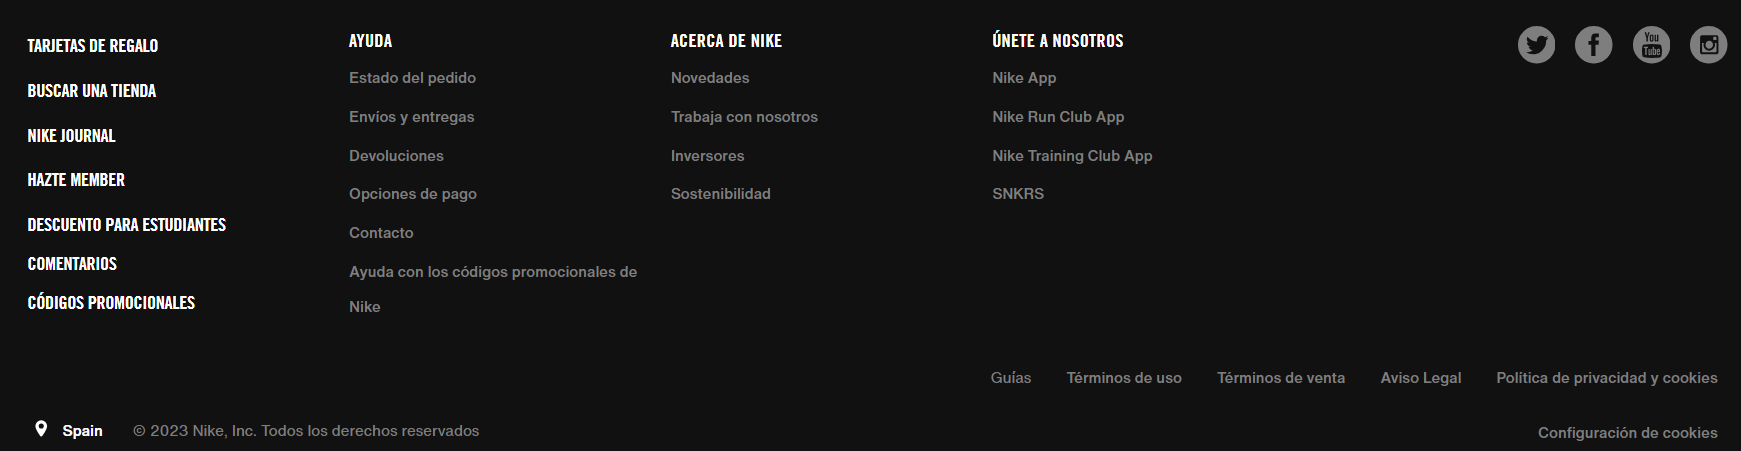 footer nike